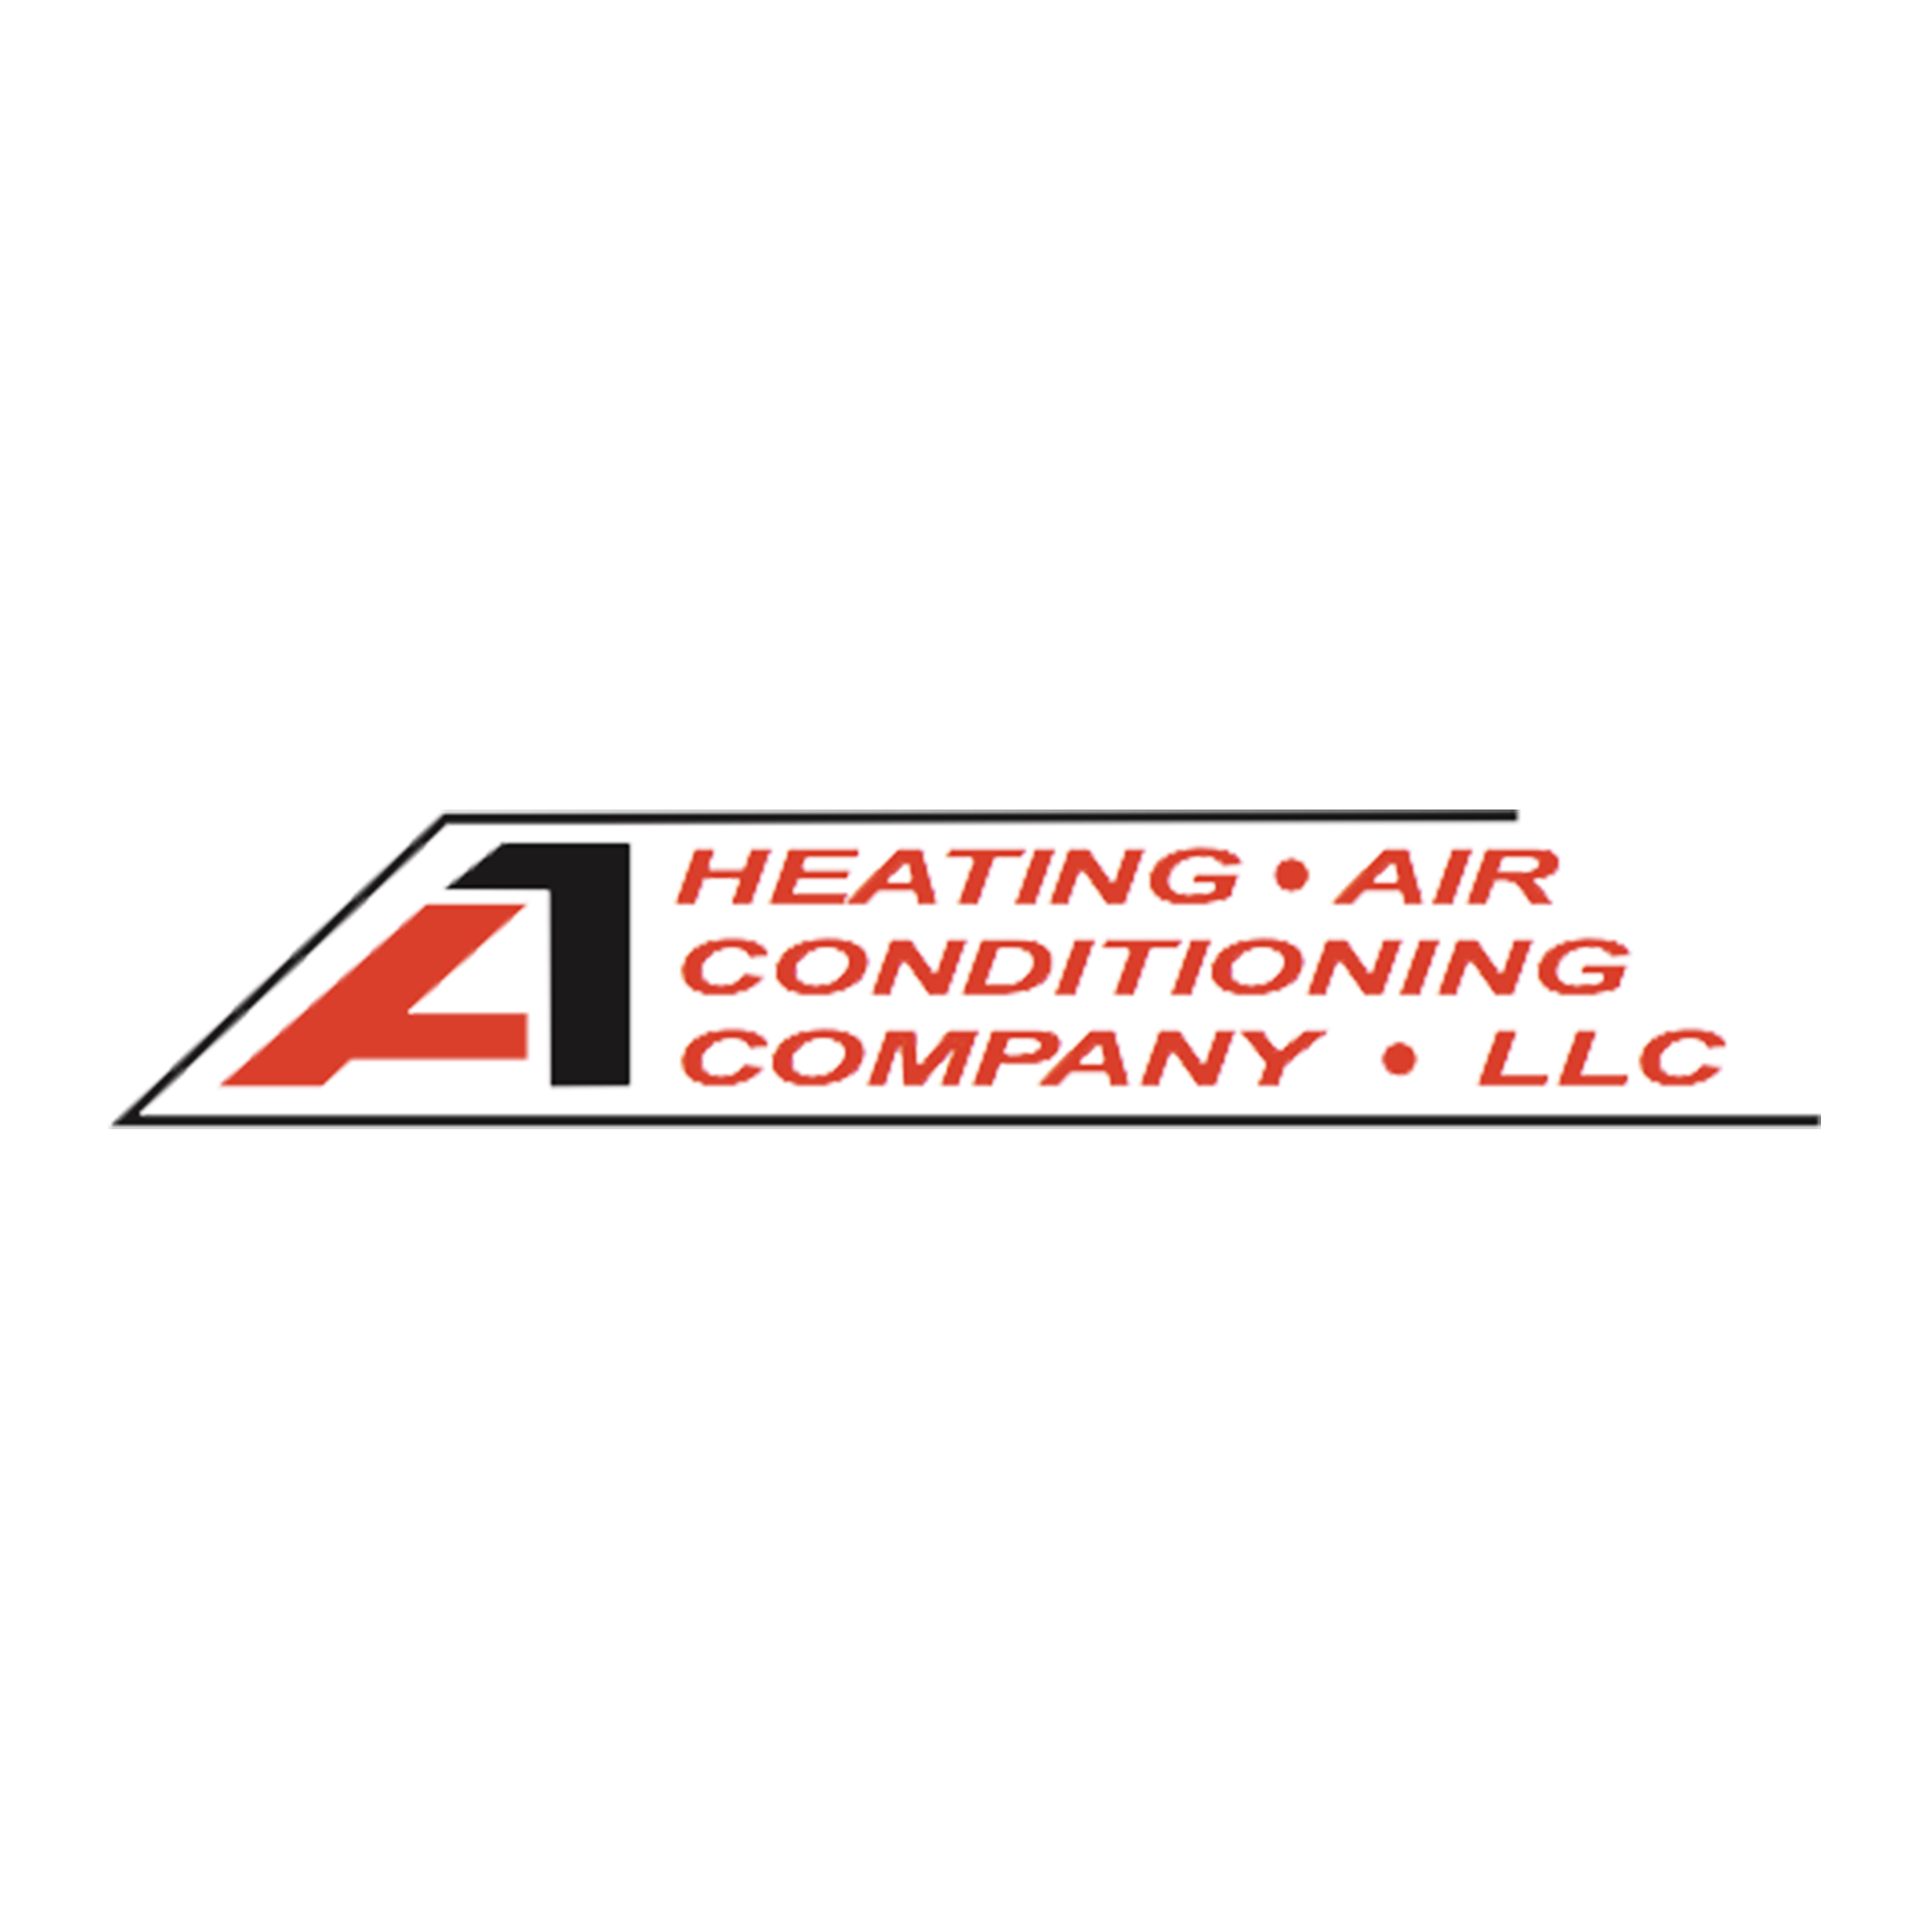 A1 Heating & Air Conditioning Company LLC